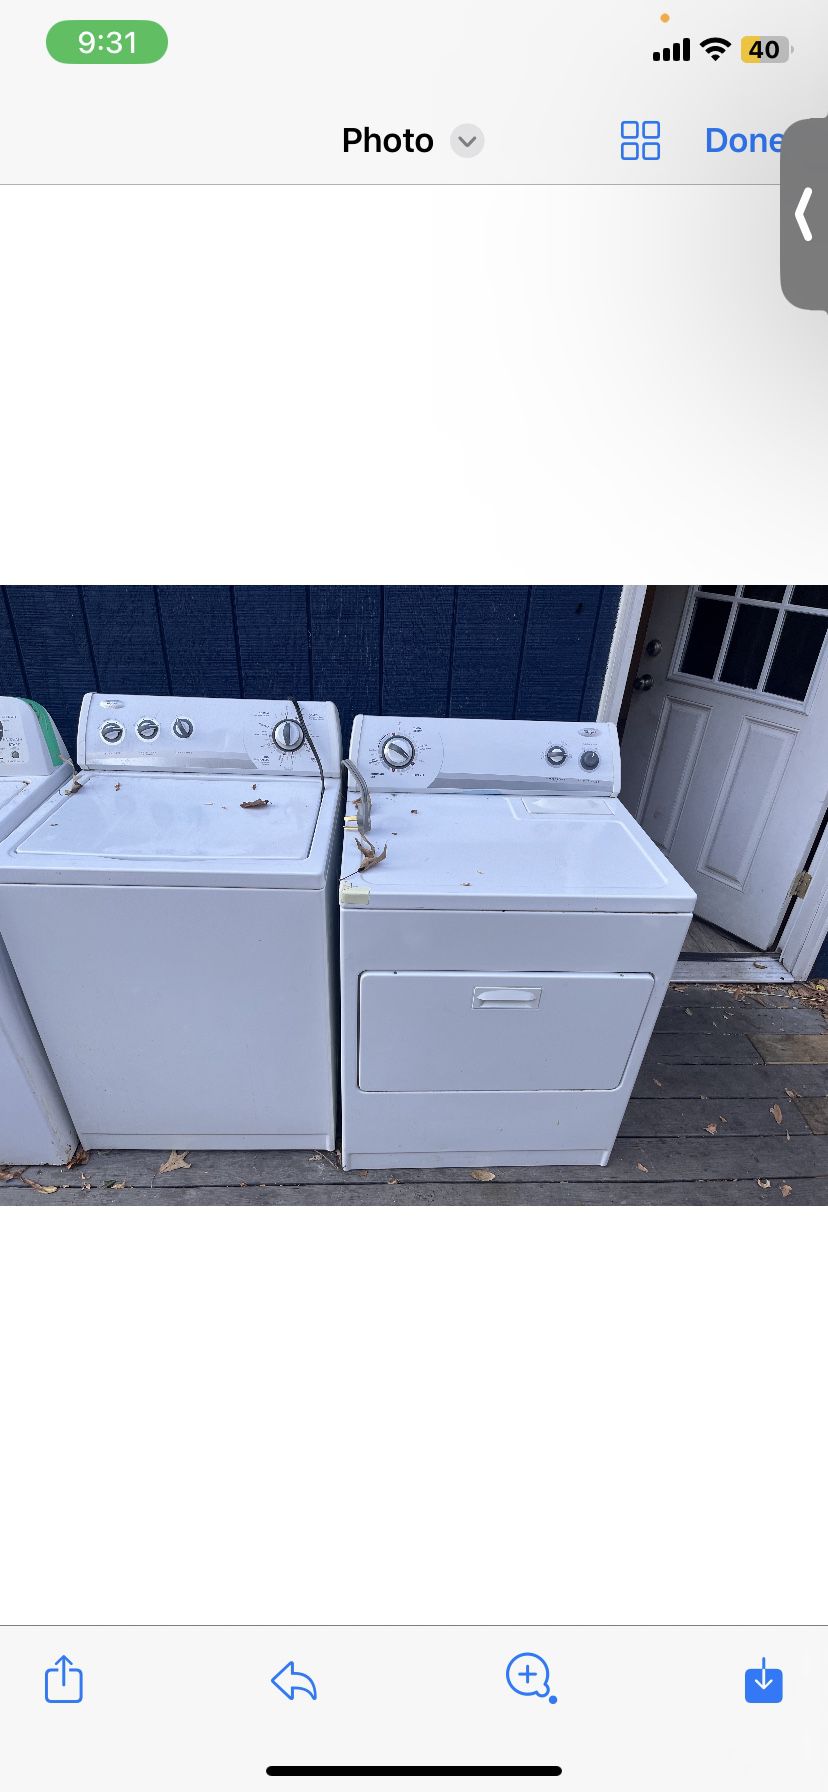 Whirlpool washer and dryer set $100. Both work . No delivery